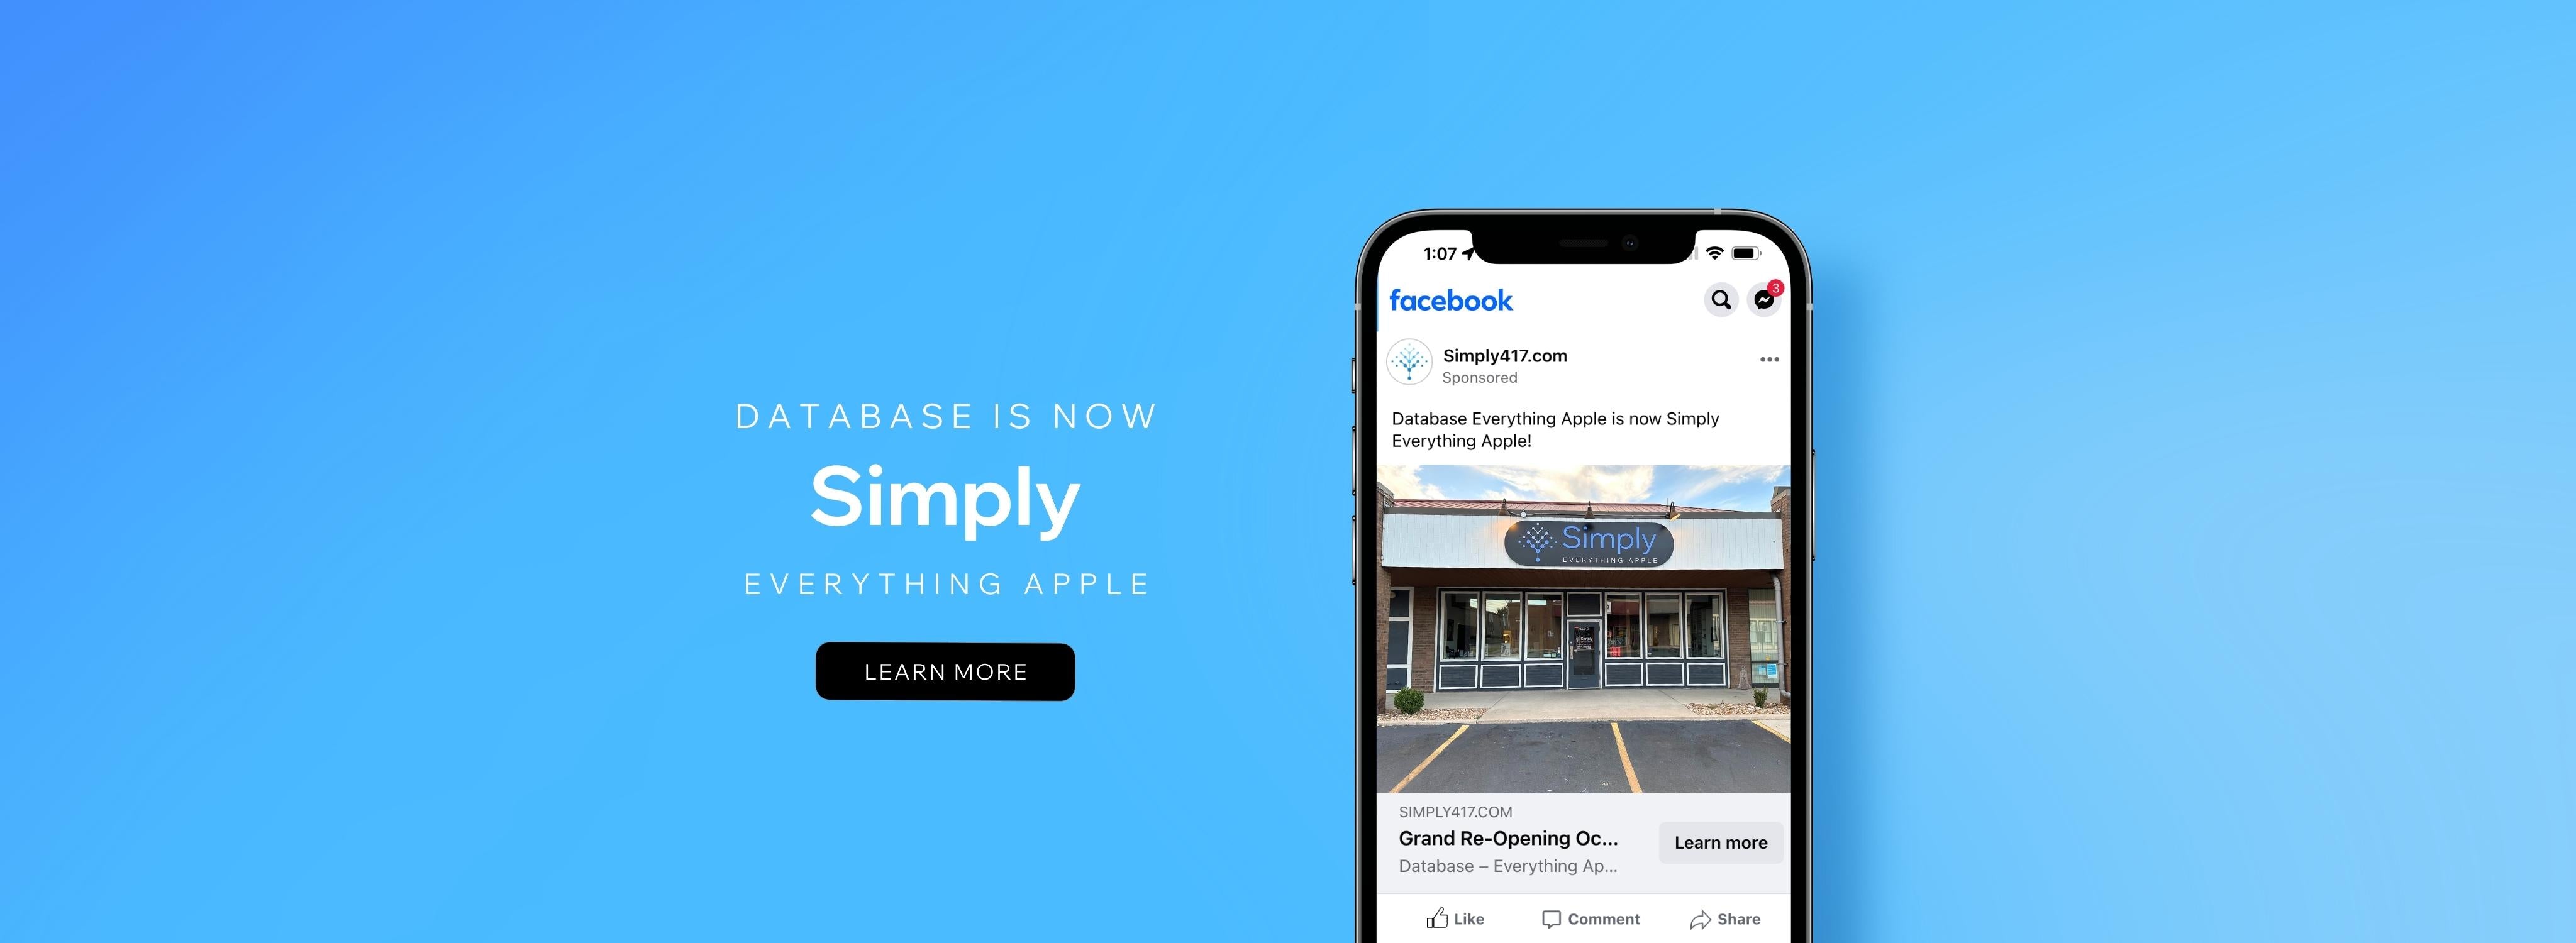 Simply Everything Apple Facebook Announcement